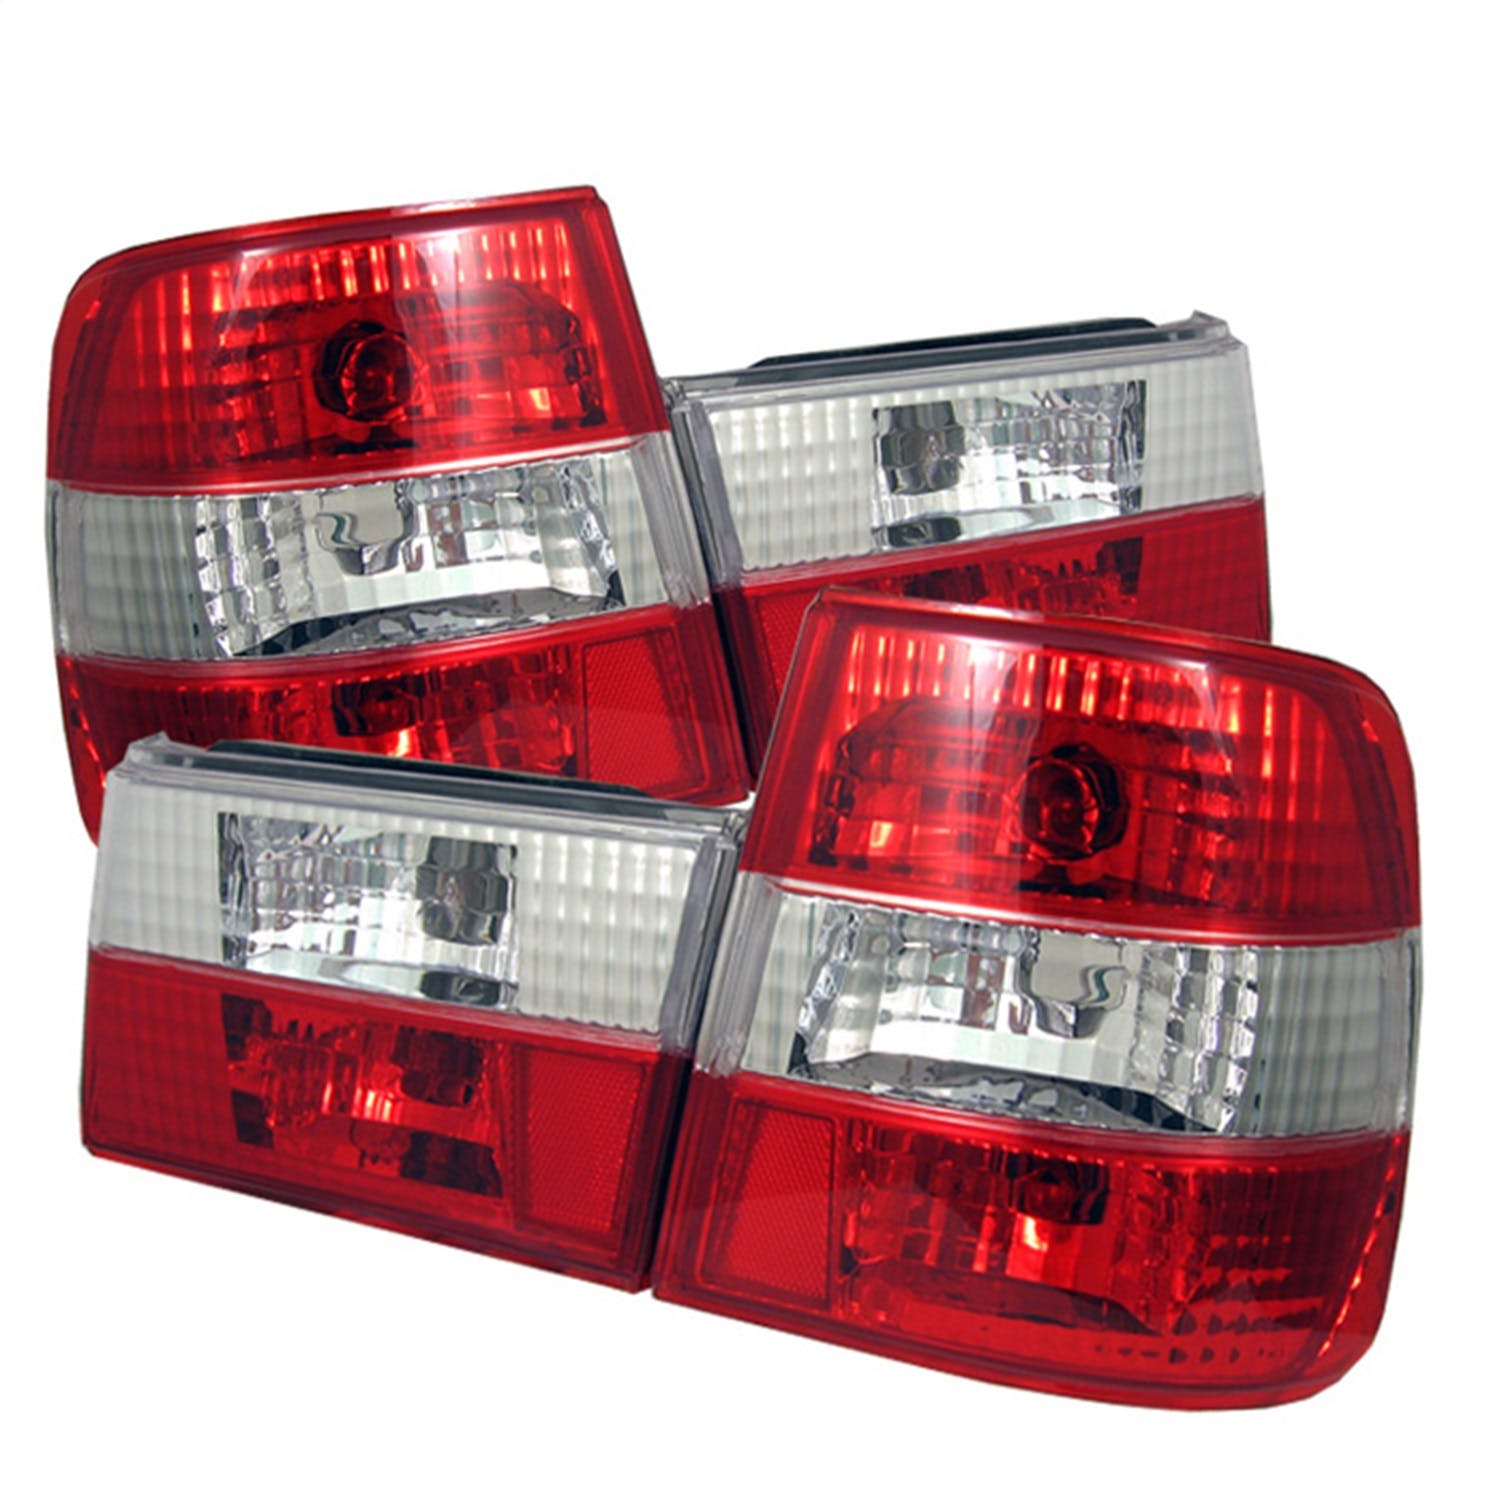 Spyder Auto 5000491 (Spyder) BMW E34 5-Series 88-95 Euro Style Tail Lights-Red Clear